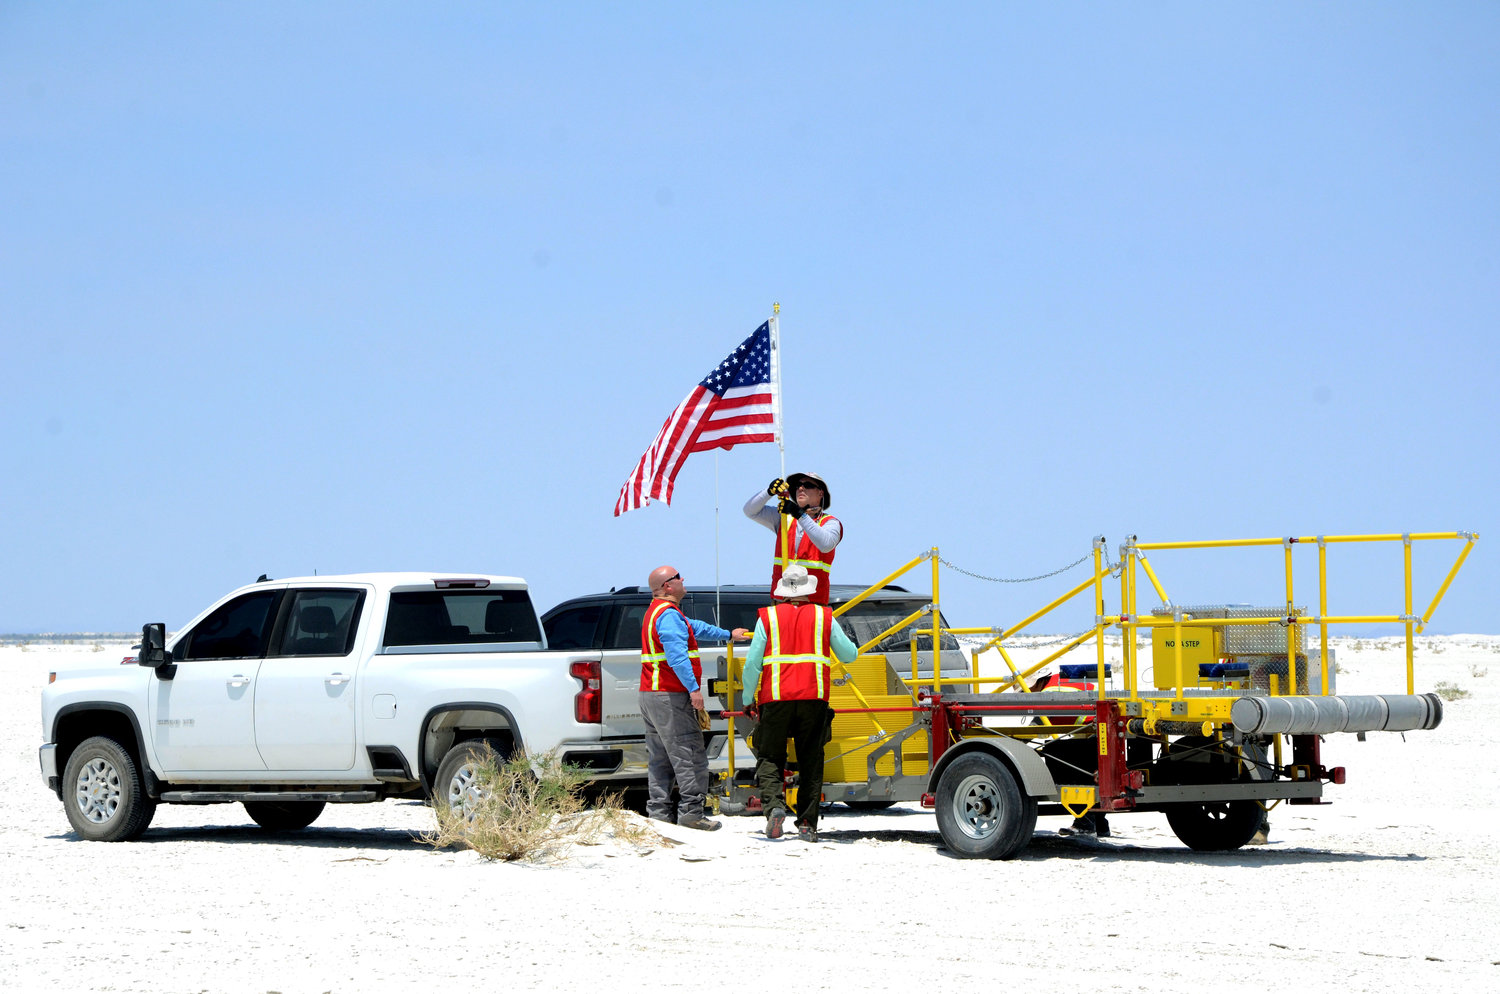 White Sands Missile Range personnel supporting NASA and
Boeing's Orbital Flight Test-2 (OFT-2) landing and recovery of the Starliner spacecraft participated in a Mission Dress Rehearsal on May 18, 2022 at White Sands Space Harbor.